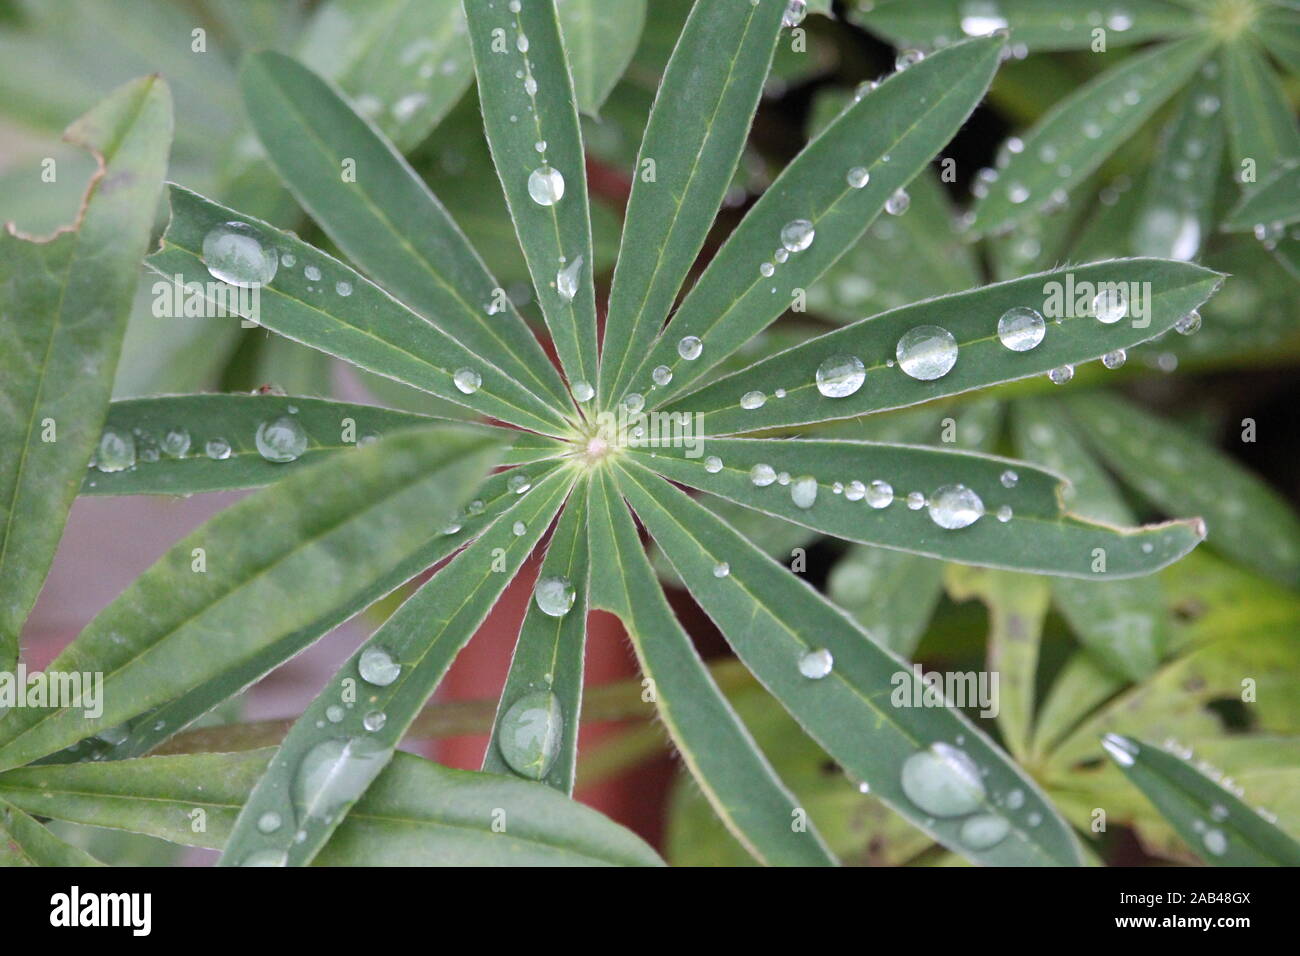 A close up photograph of water droplets sat on the delicate leaves of a lupin plant. Stock Photo